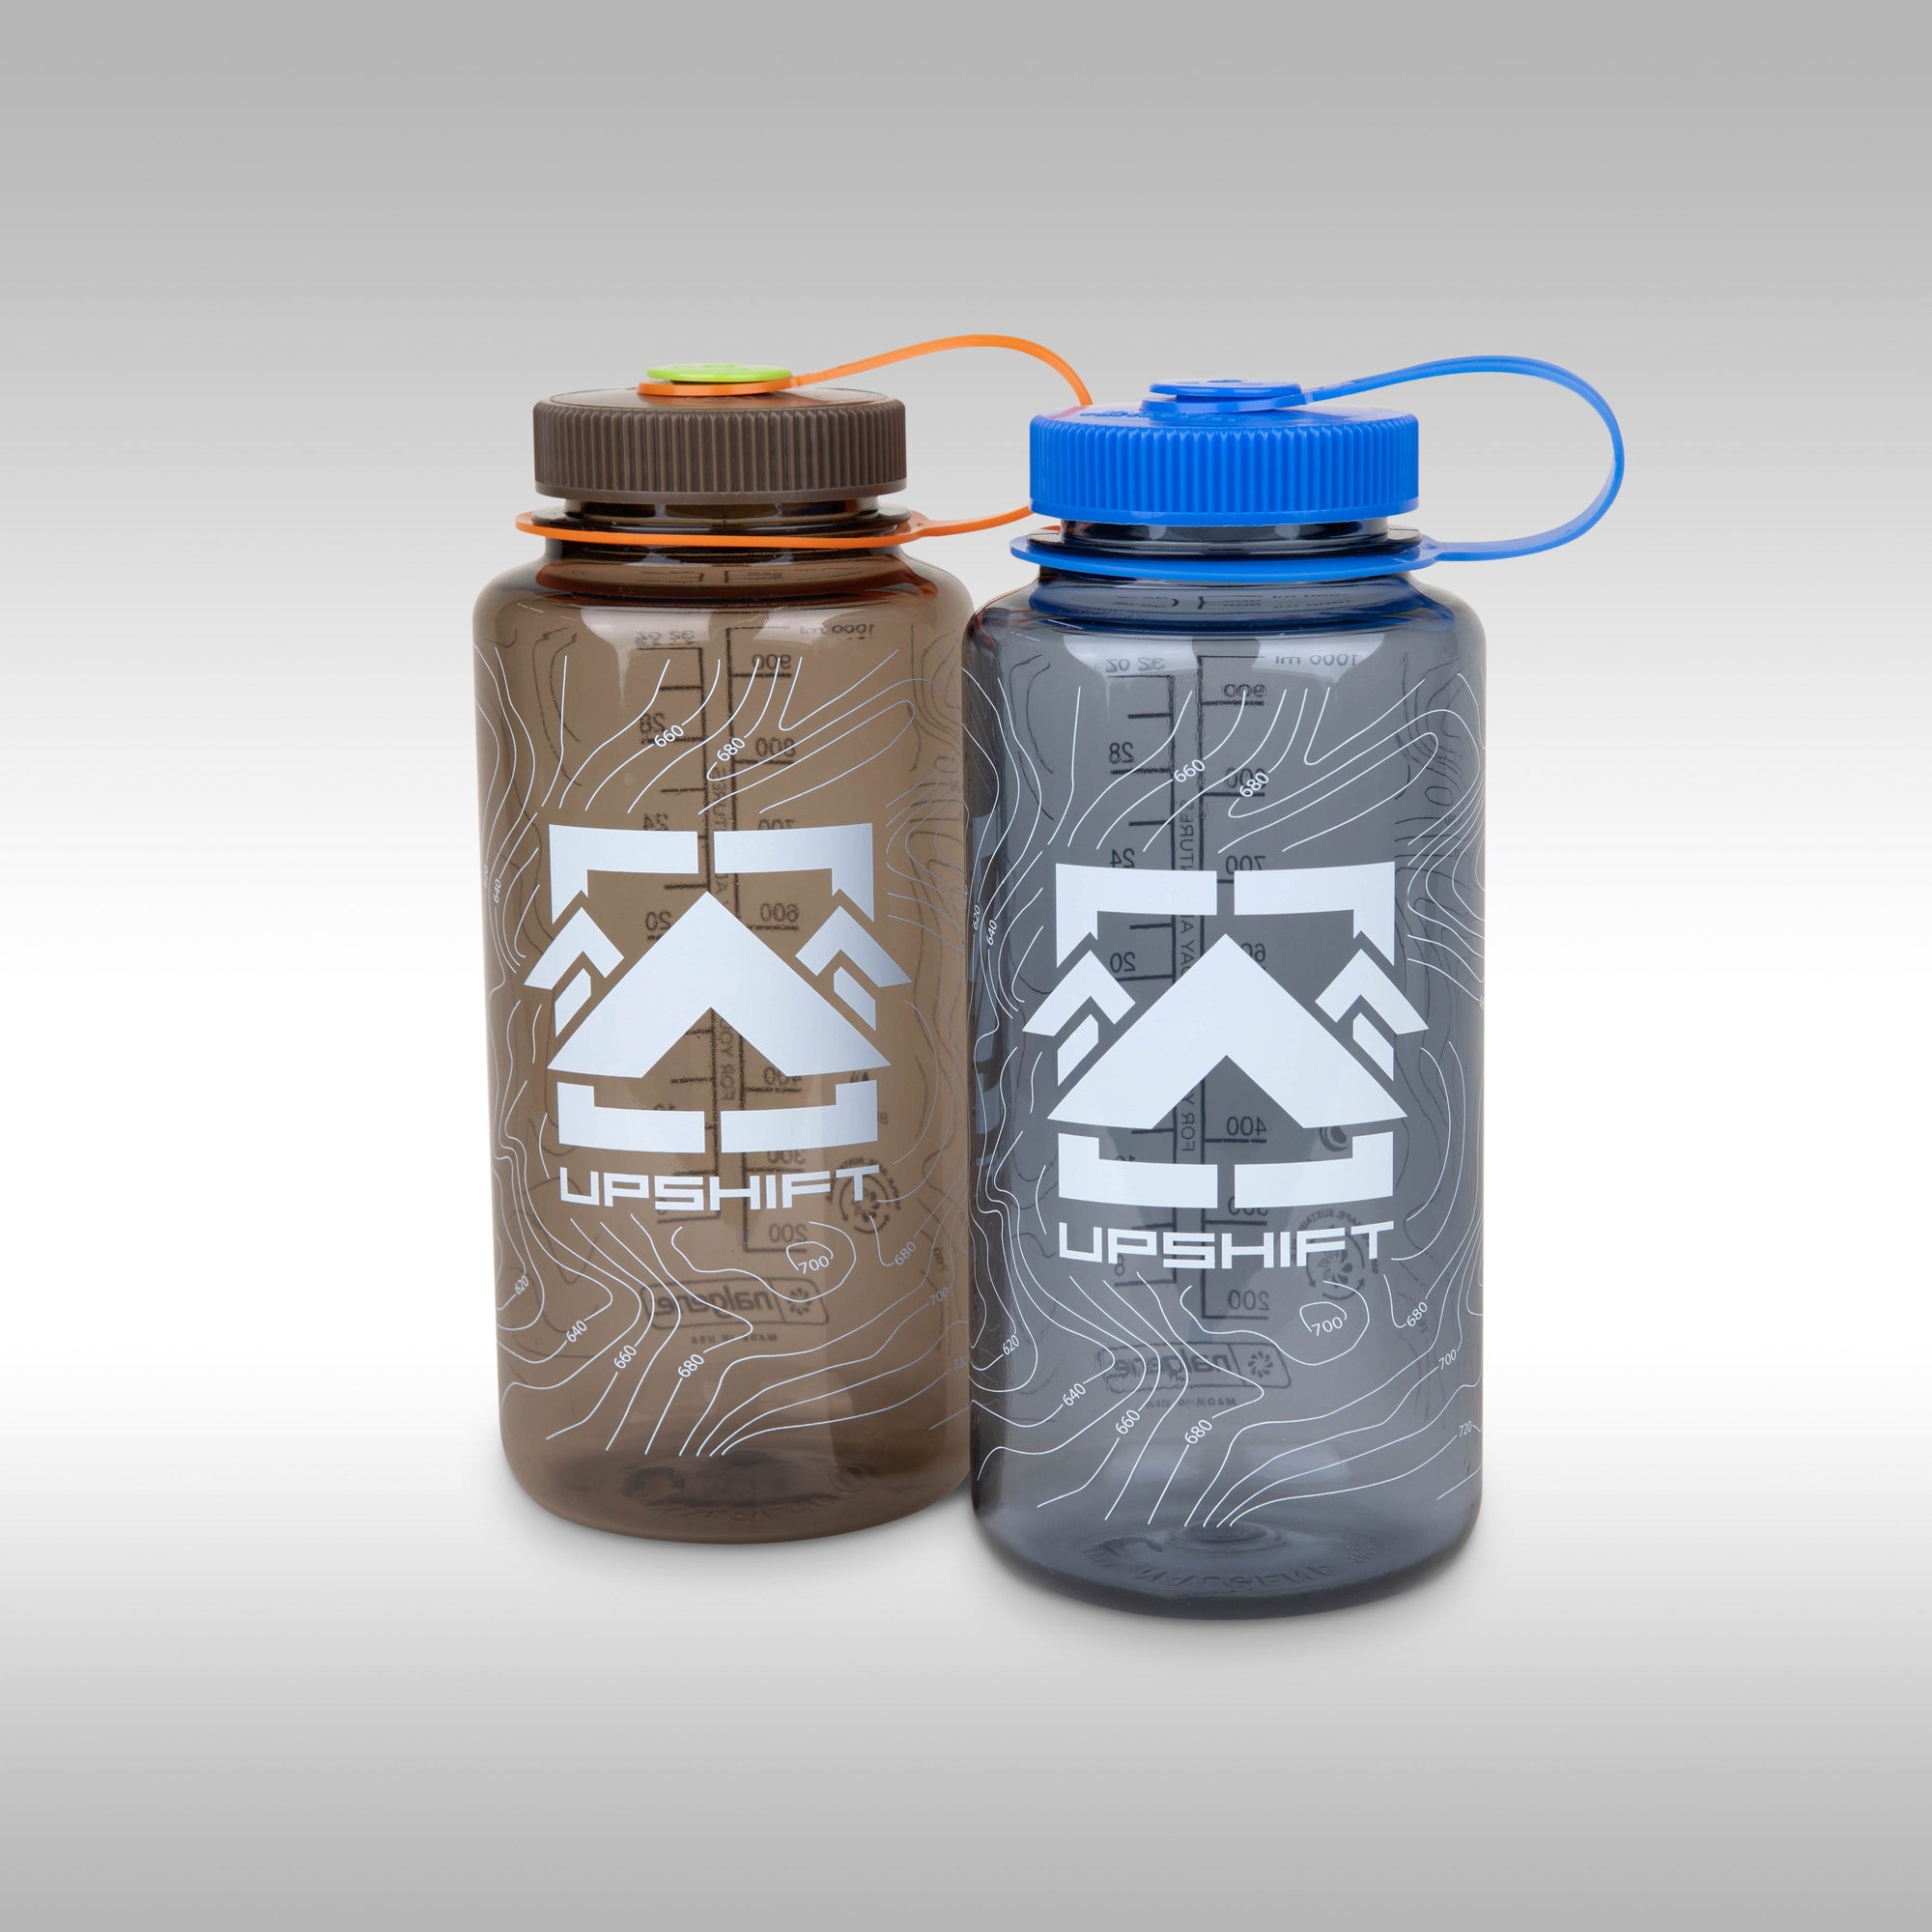 Nalgene water bottles are the standard bearer or water bottles. BPA Free Tritan Copolyester is incredibly durable and can hold up to the most punishing adventure and they won't leak. Transport the water you need on your next trip.